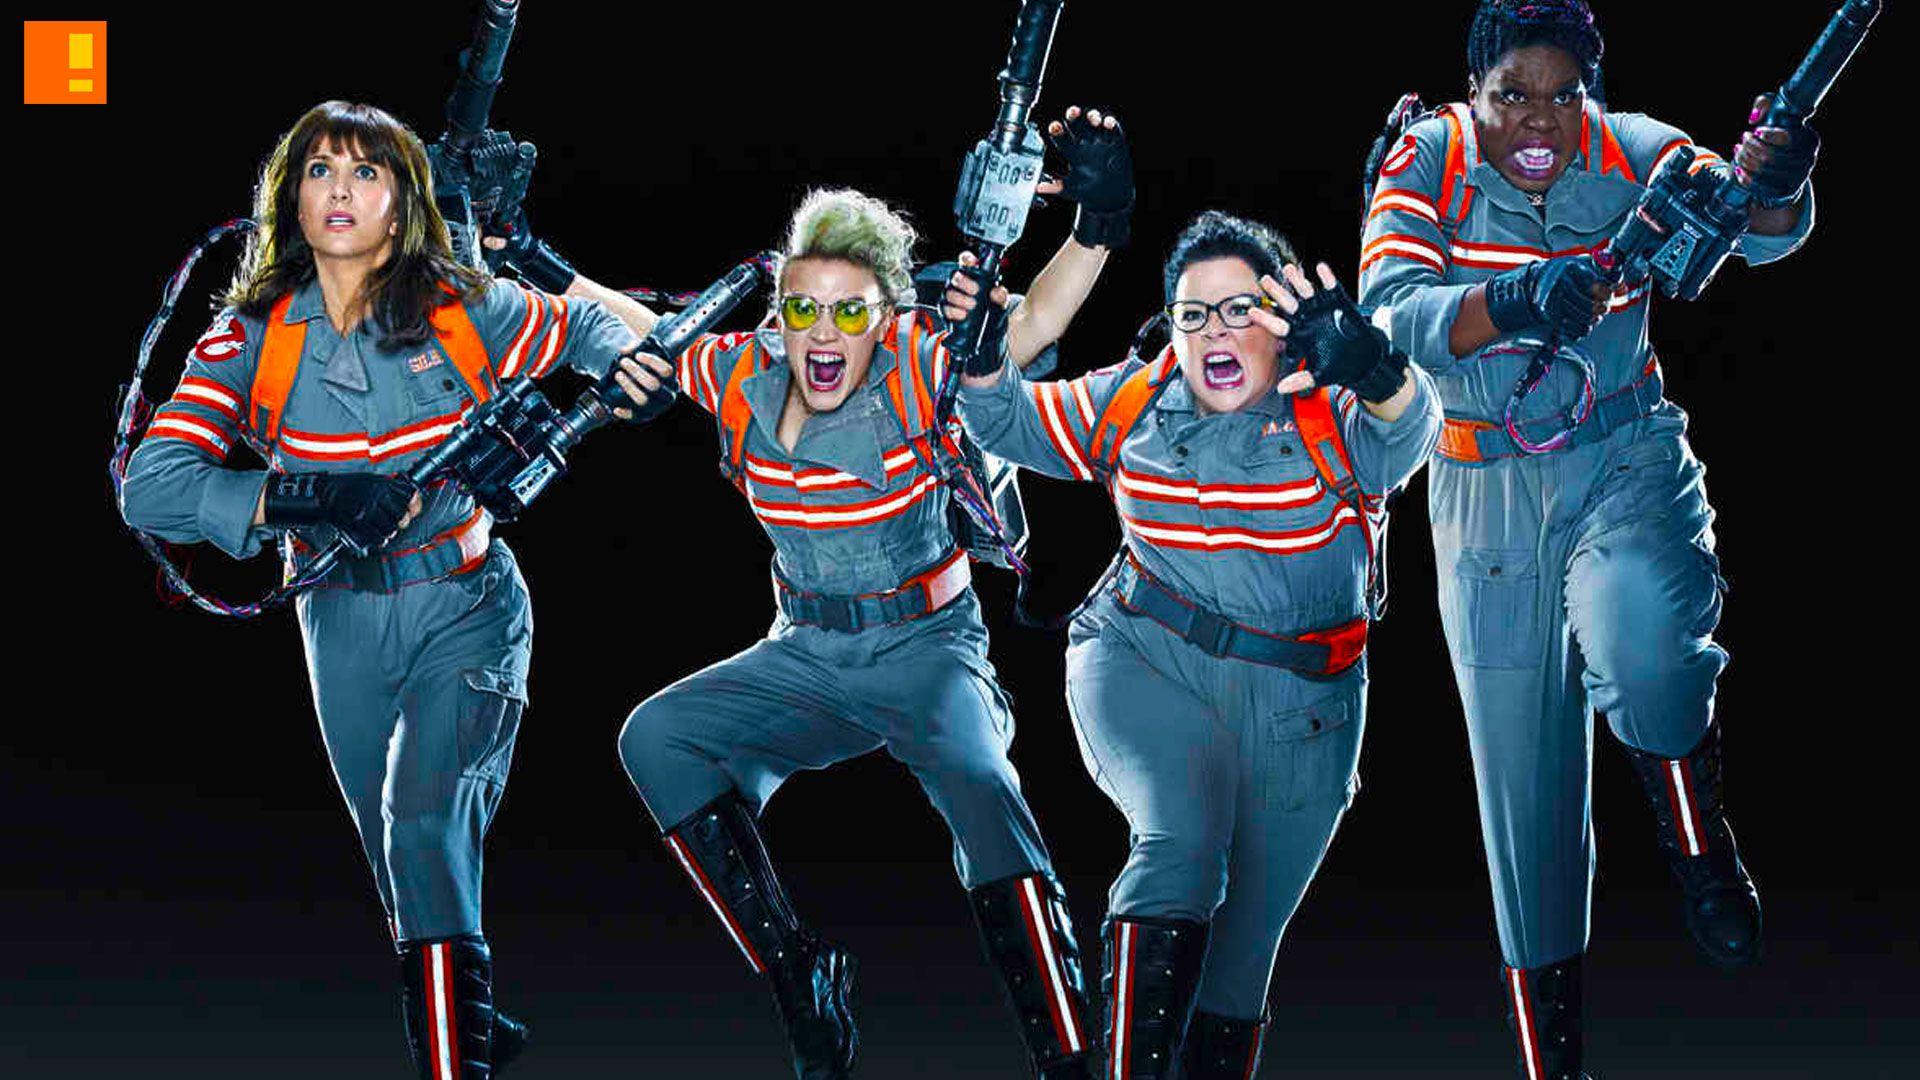 Ghostbusters” trailer 2 released. The Action Pixel